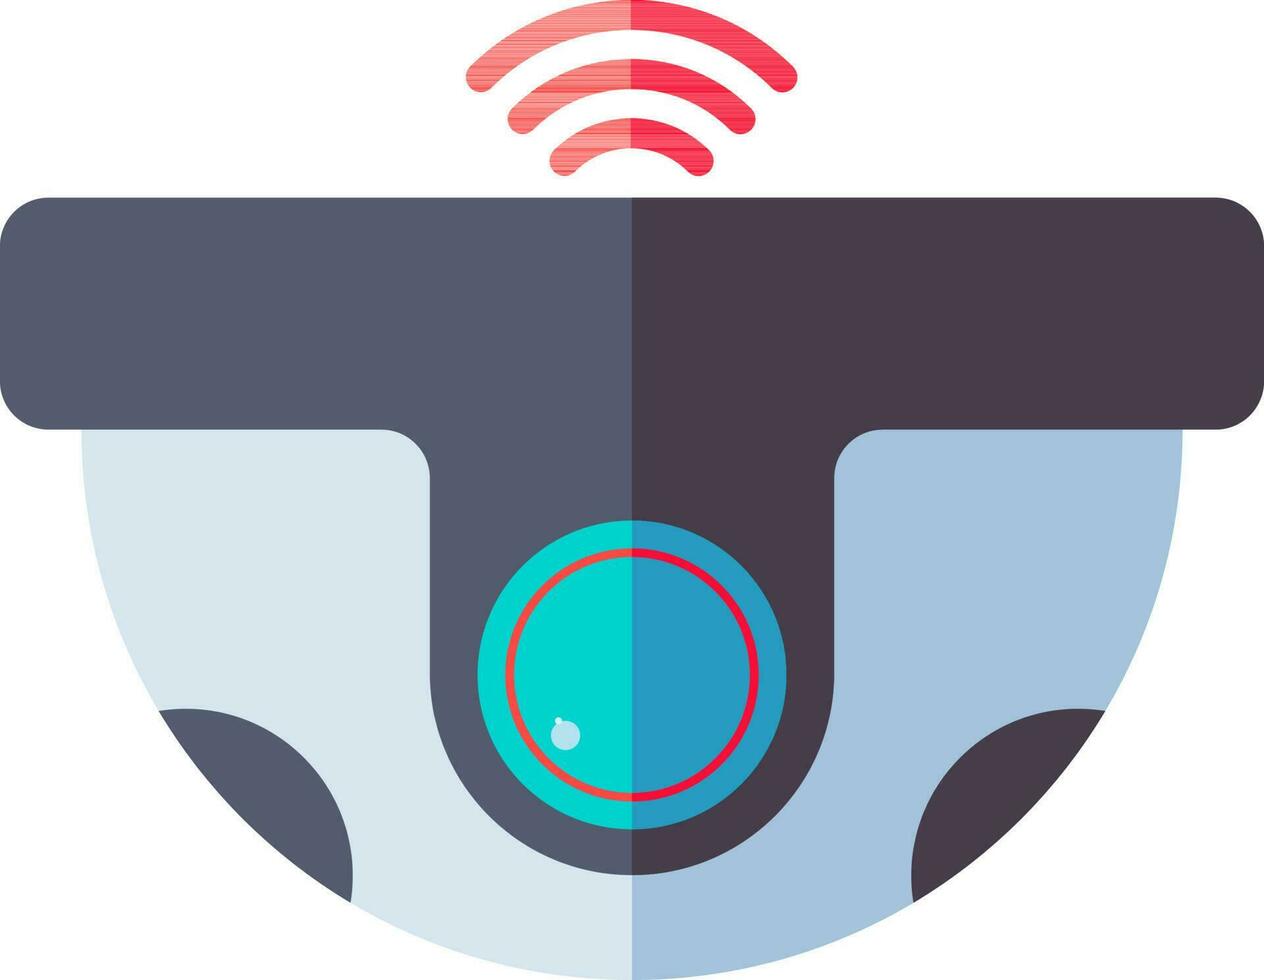 Dome camera icon in gray and red color. vector